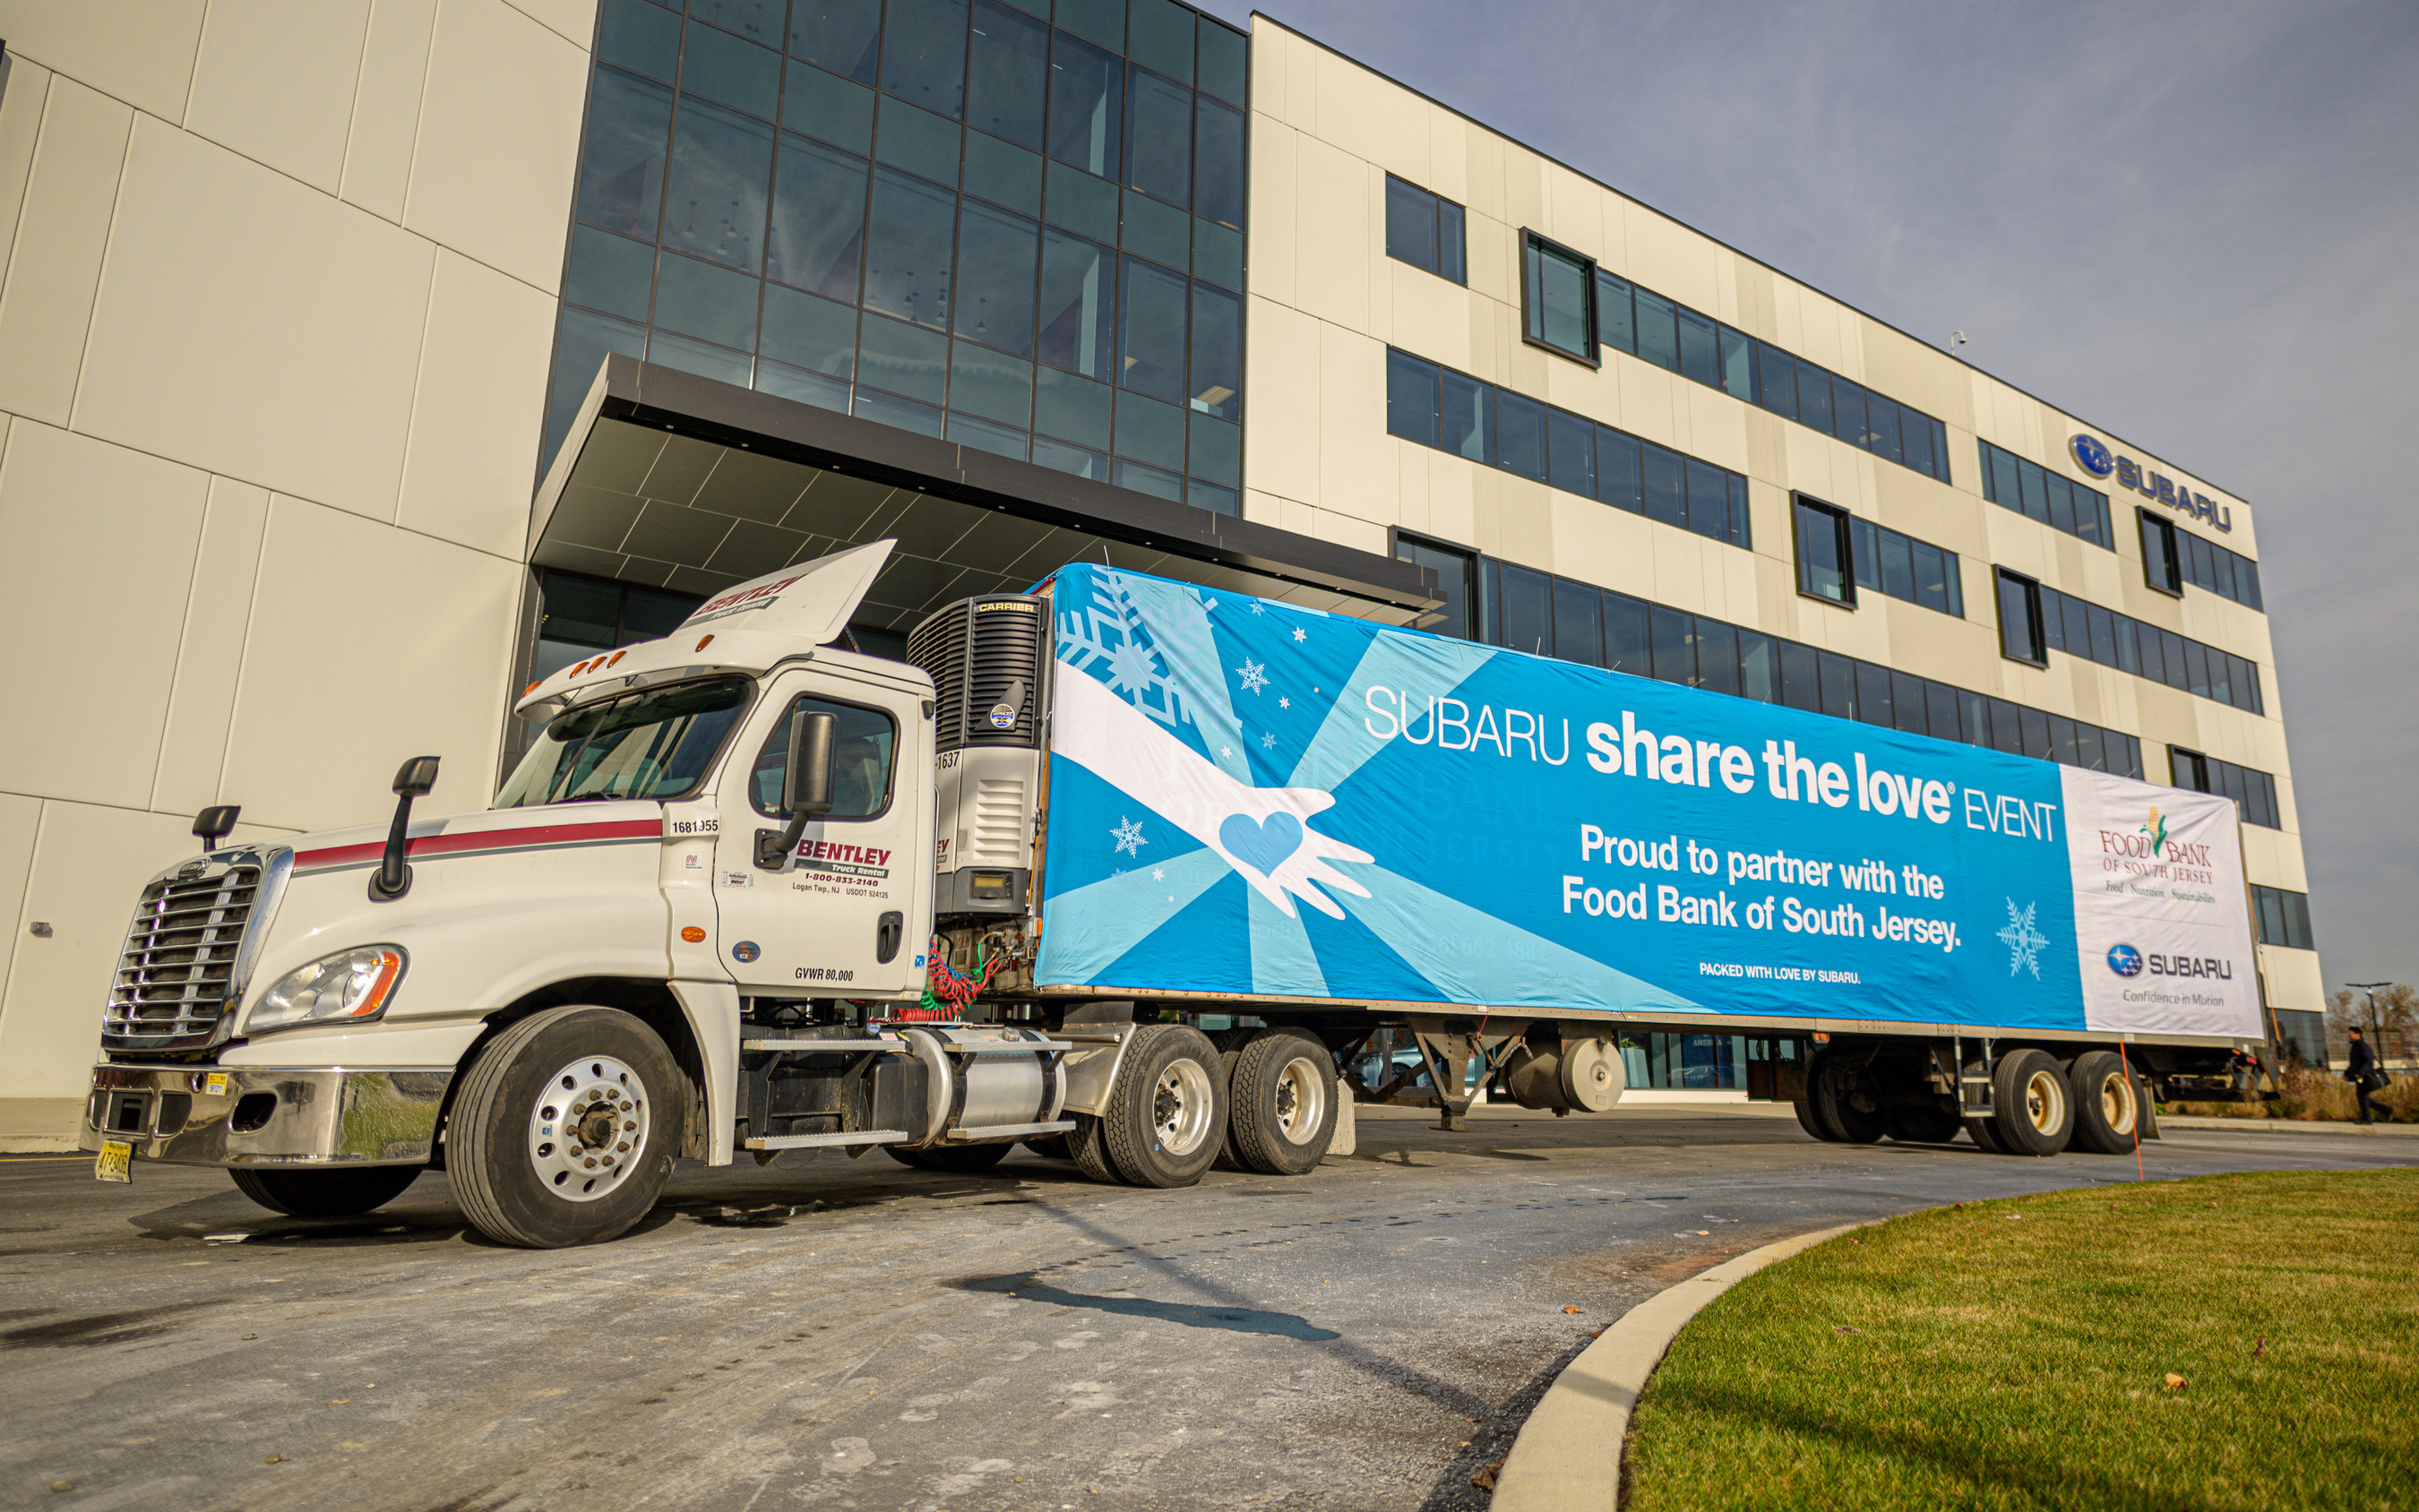 Subaru Of America Shifts Efforts To Combat Childhood Hunger Into High Gear With 2019 Share The Love® Event Kickoff